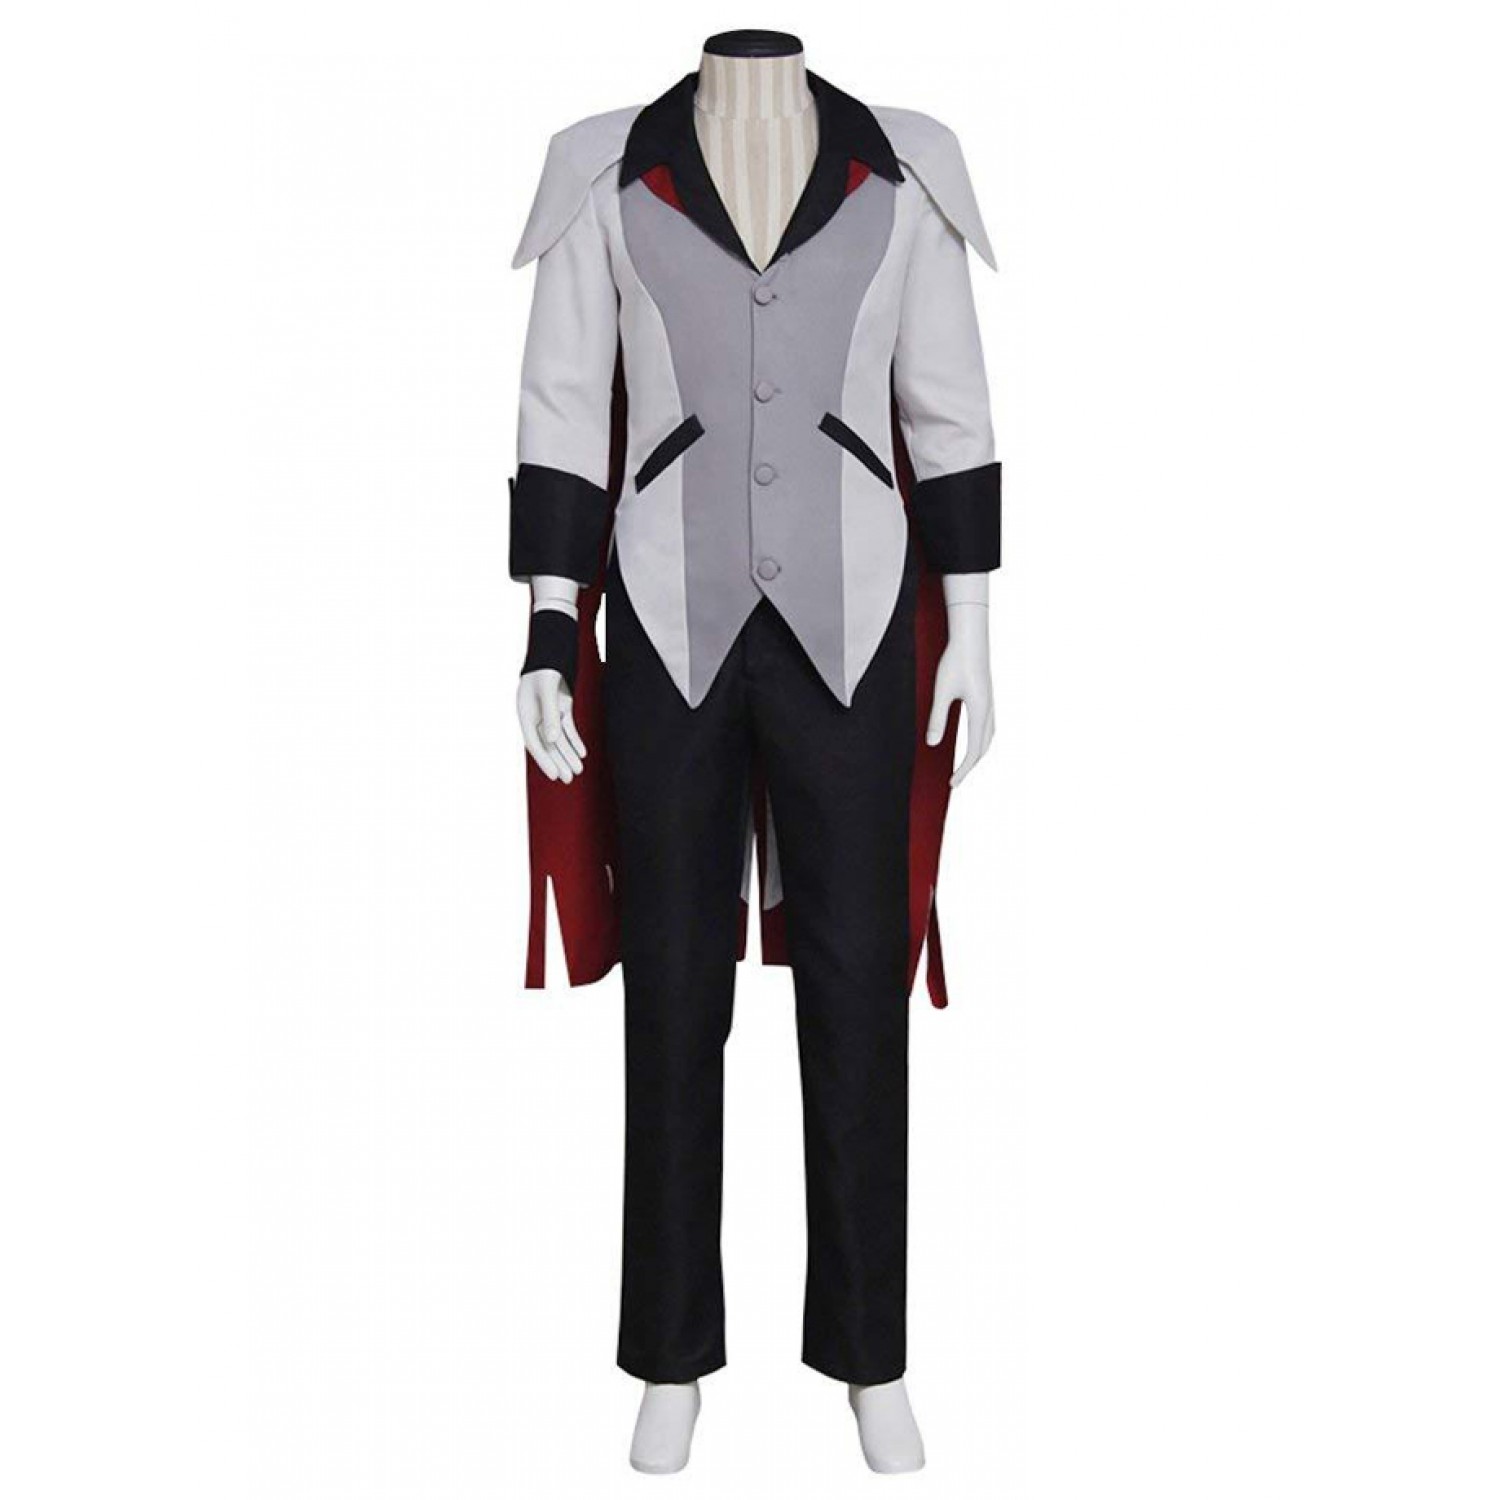 RWBY Qrow Branwen Full Outfit Cosplay Costume ( free shipping ) - $109.99